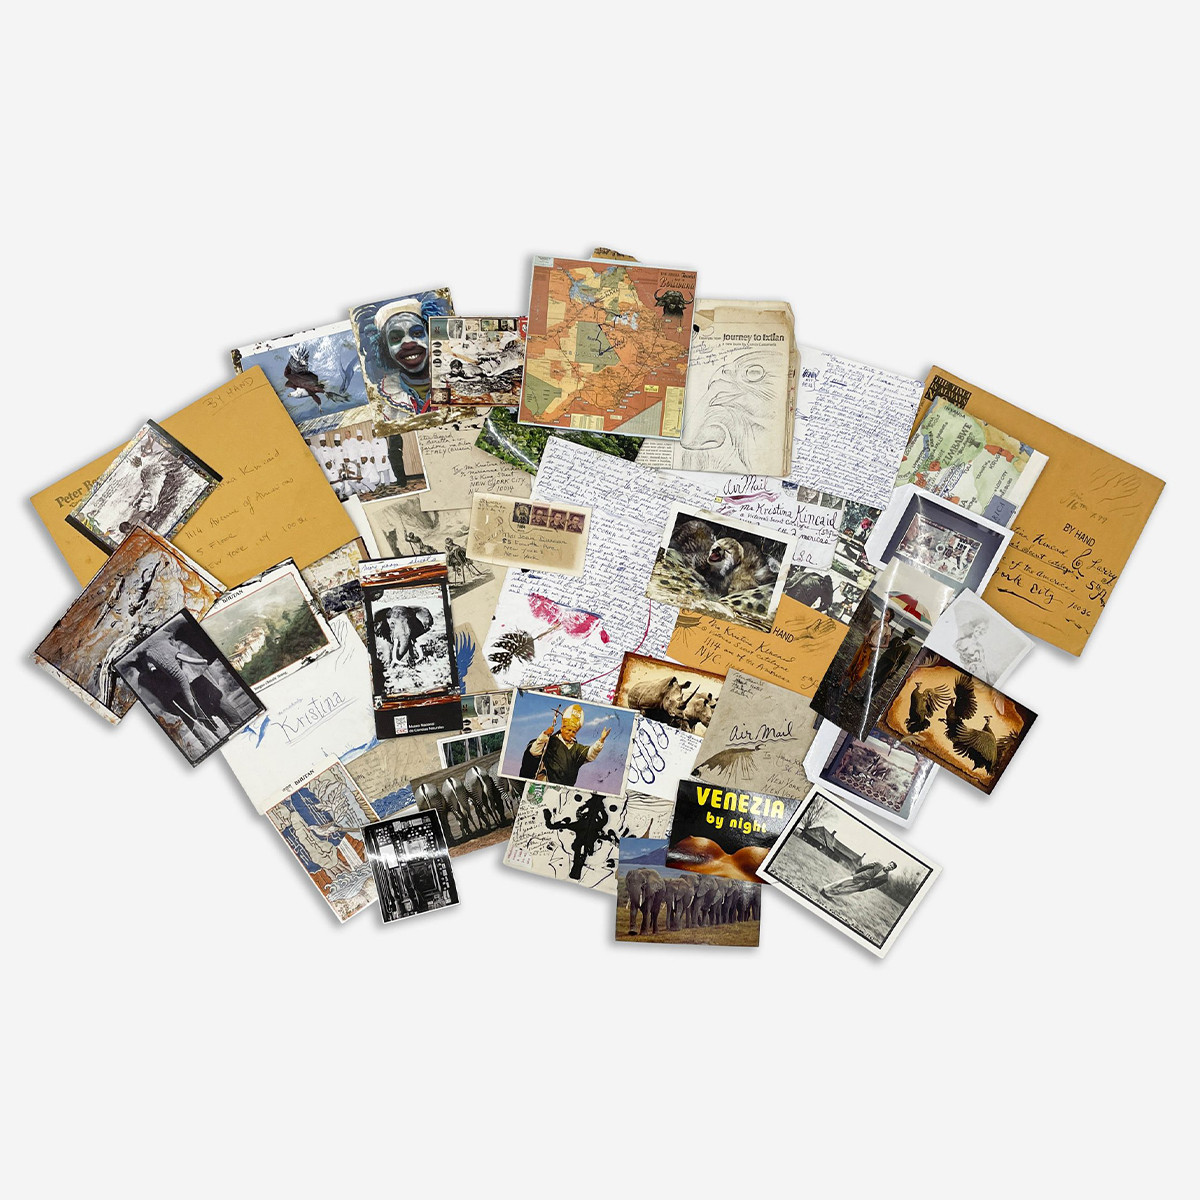 Peter Beard Drawings Accompanied by Correspondence and Effects